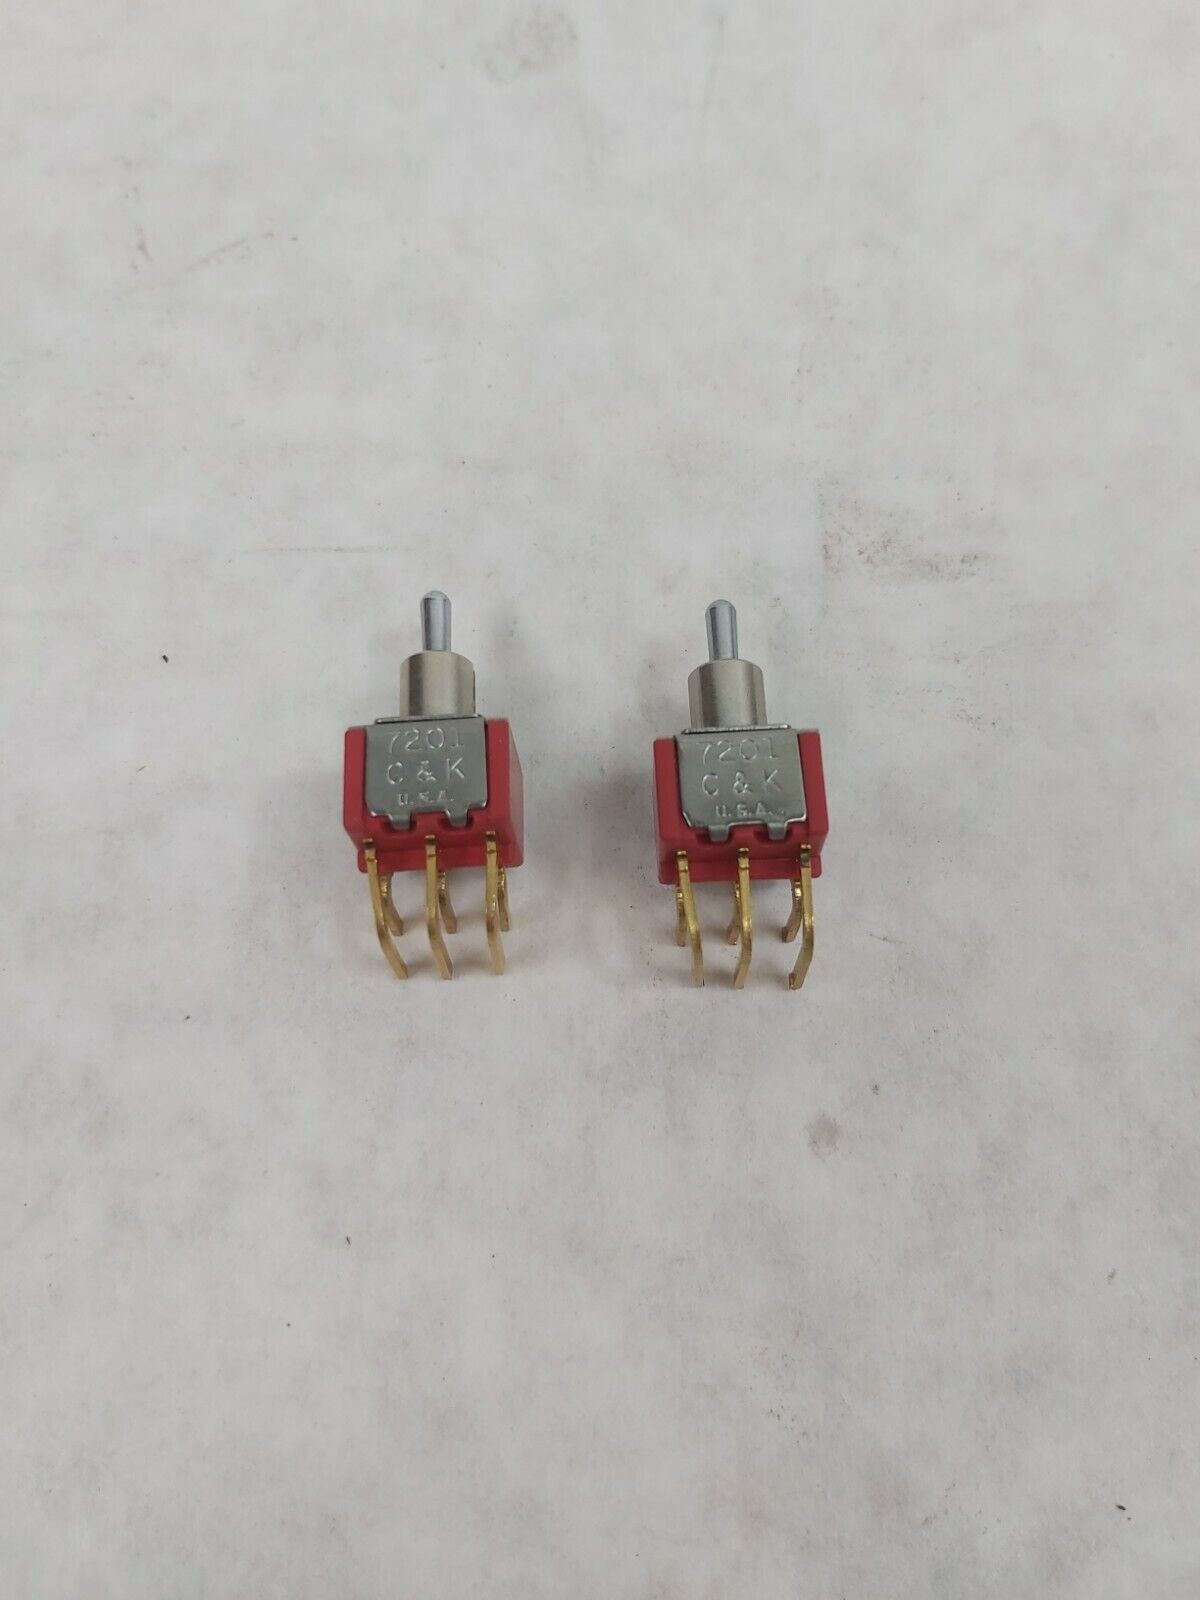 C&K DPDT Toggle Switch 2 Position ON/ON 7201 Series (Red) Lot of 2